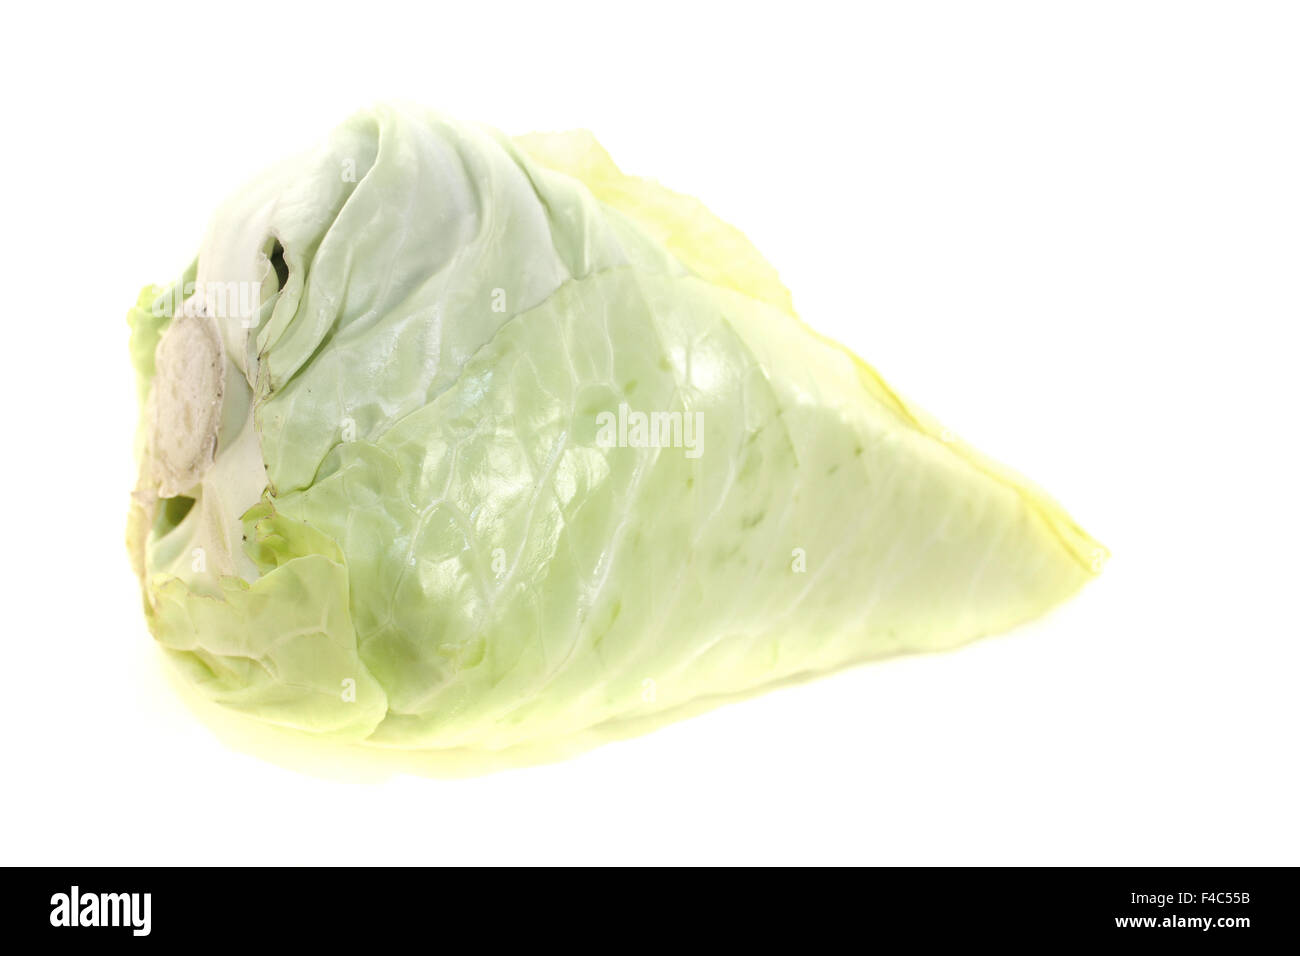 sweetheart cabbage Stock Photo